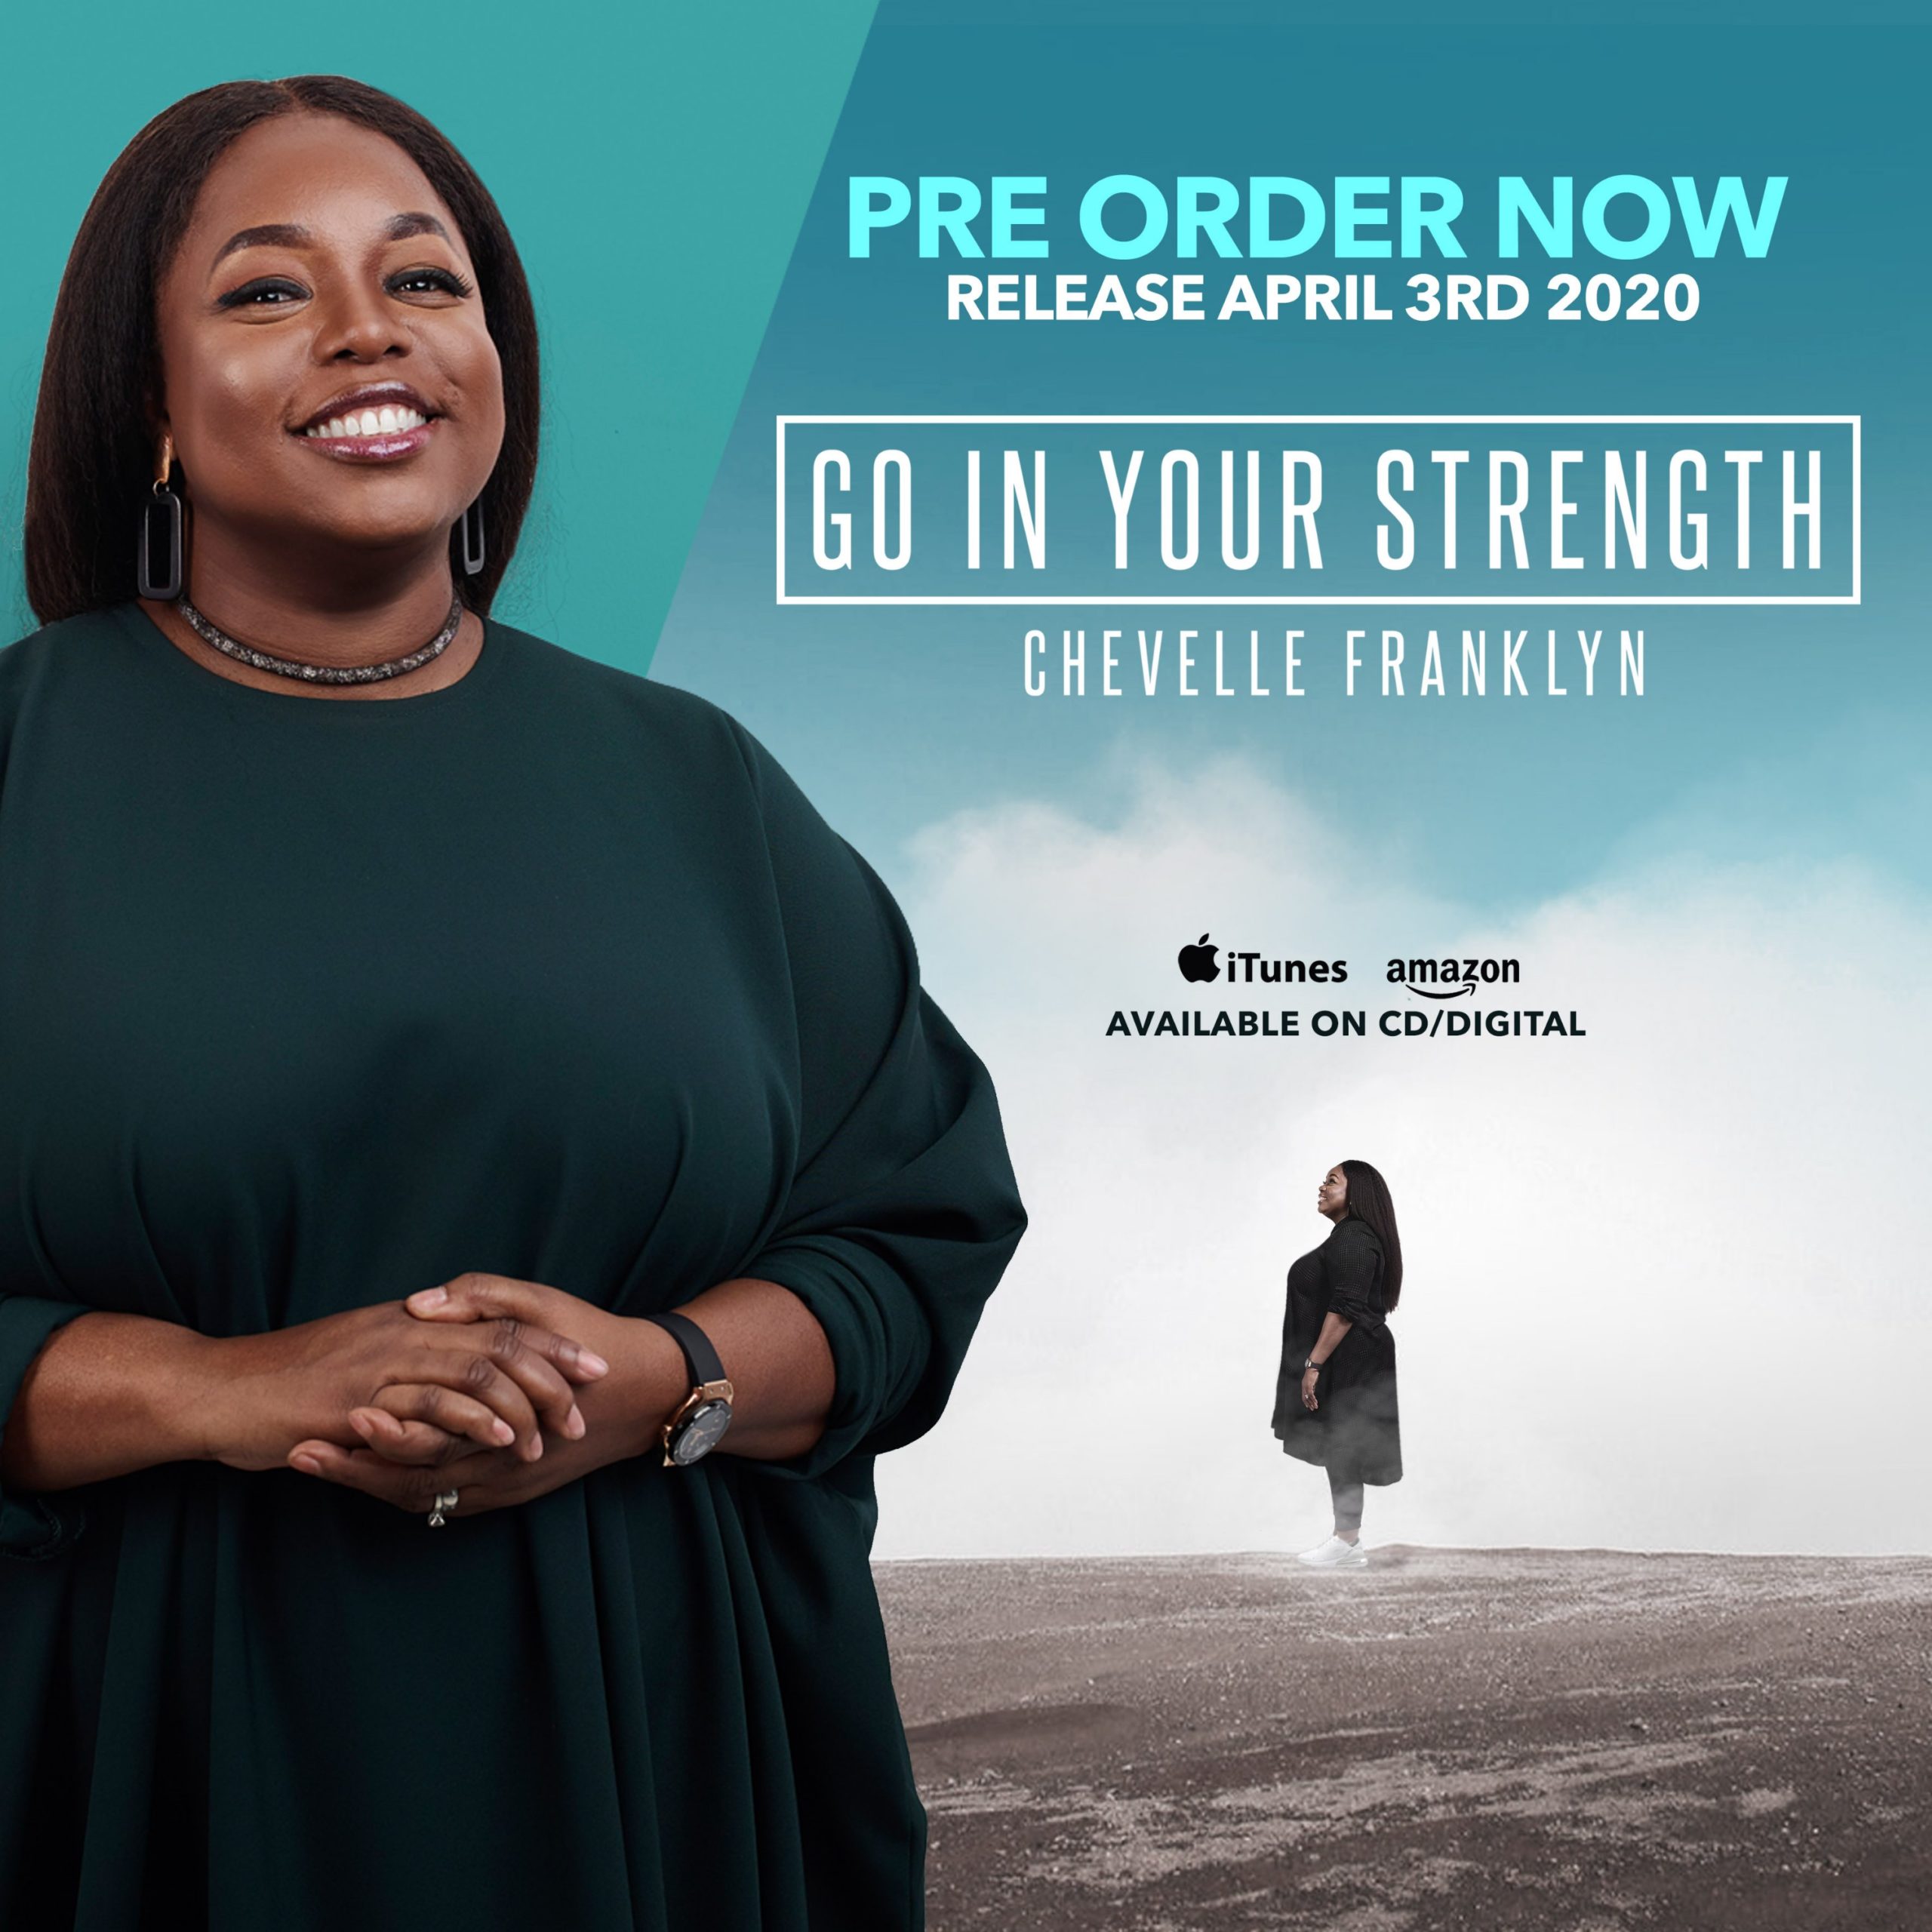 Chevelle Franklyn Set To Release New Music, "Go In Your Strength" April 3rd,